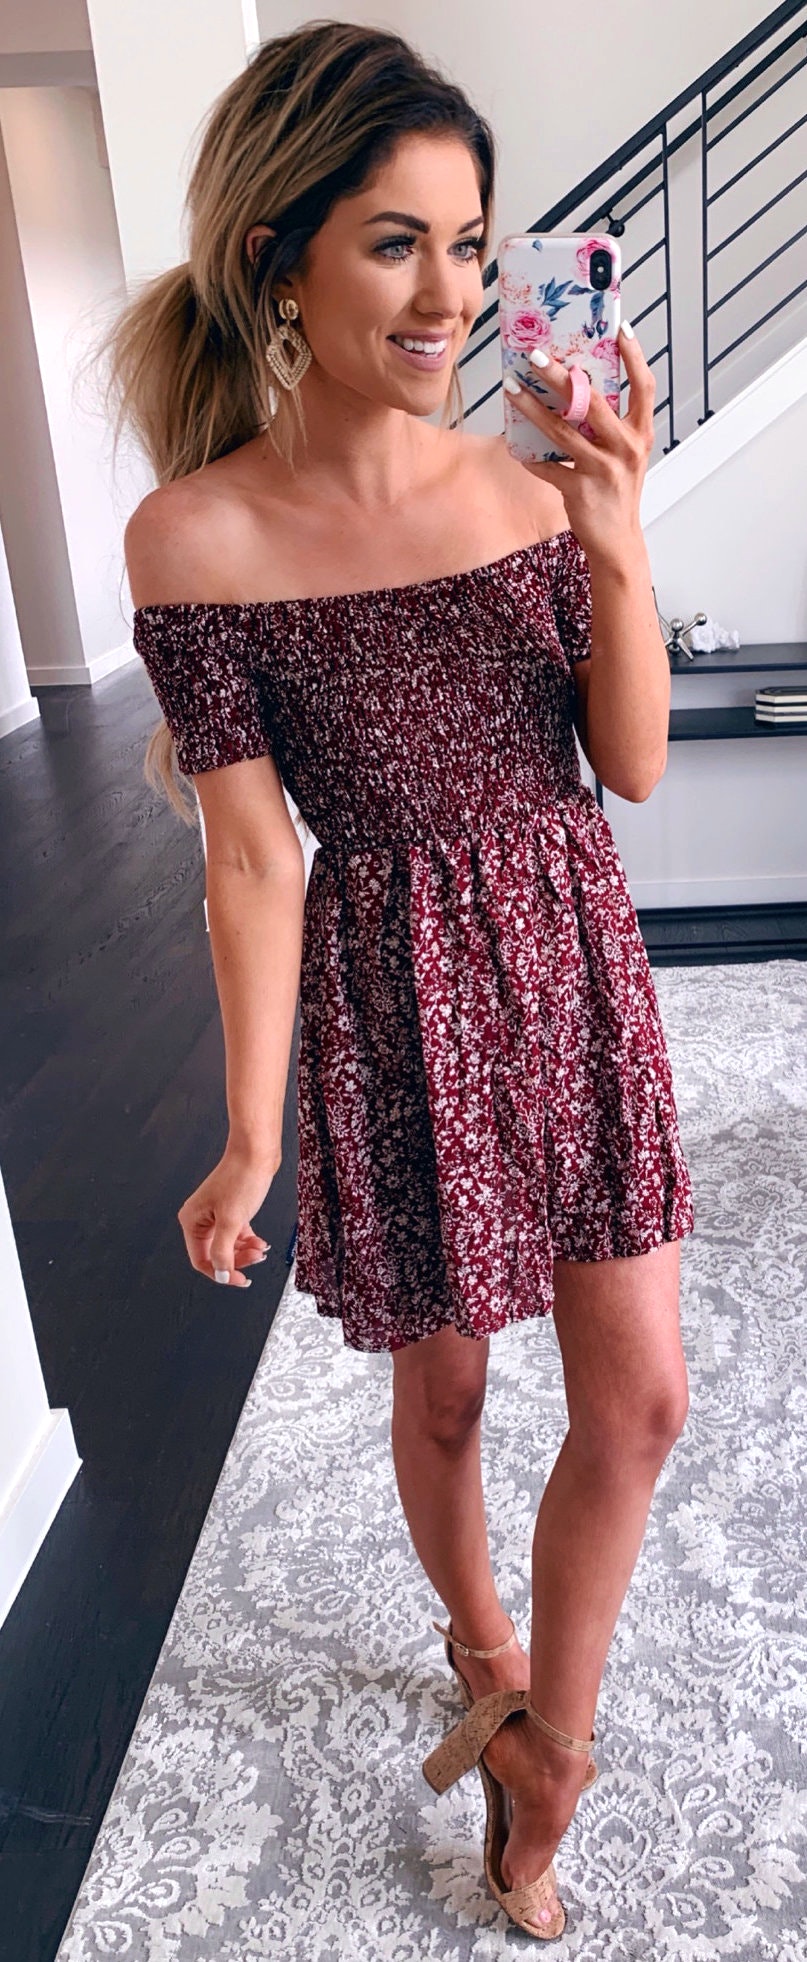 Brown and white floral off-shoulder mini dress.